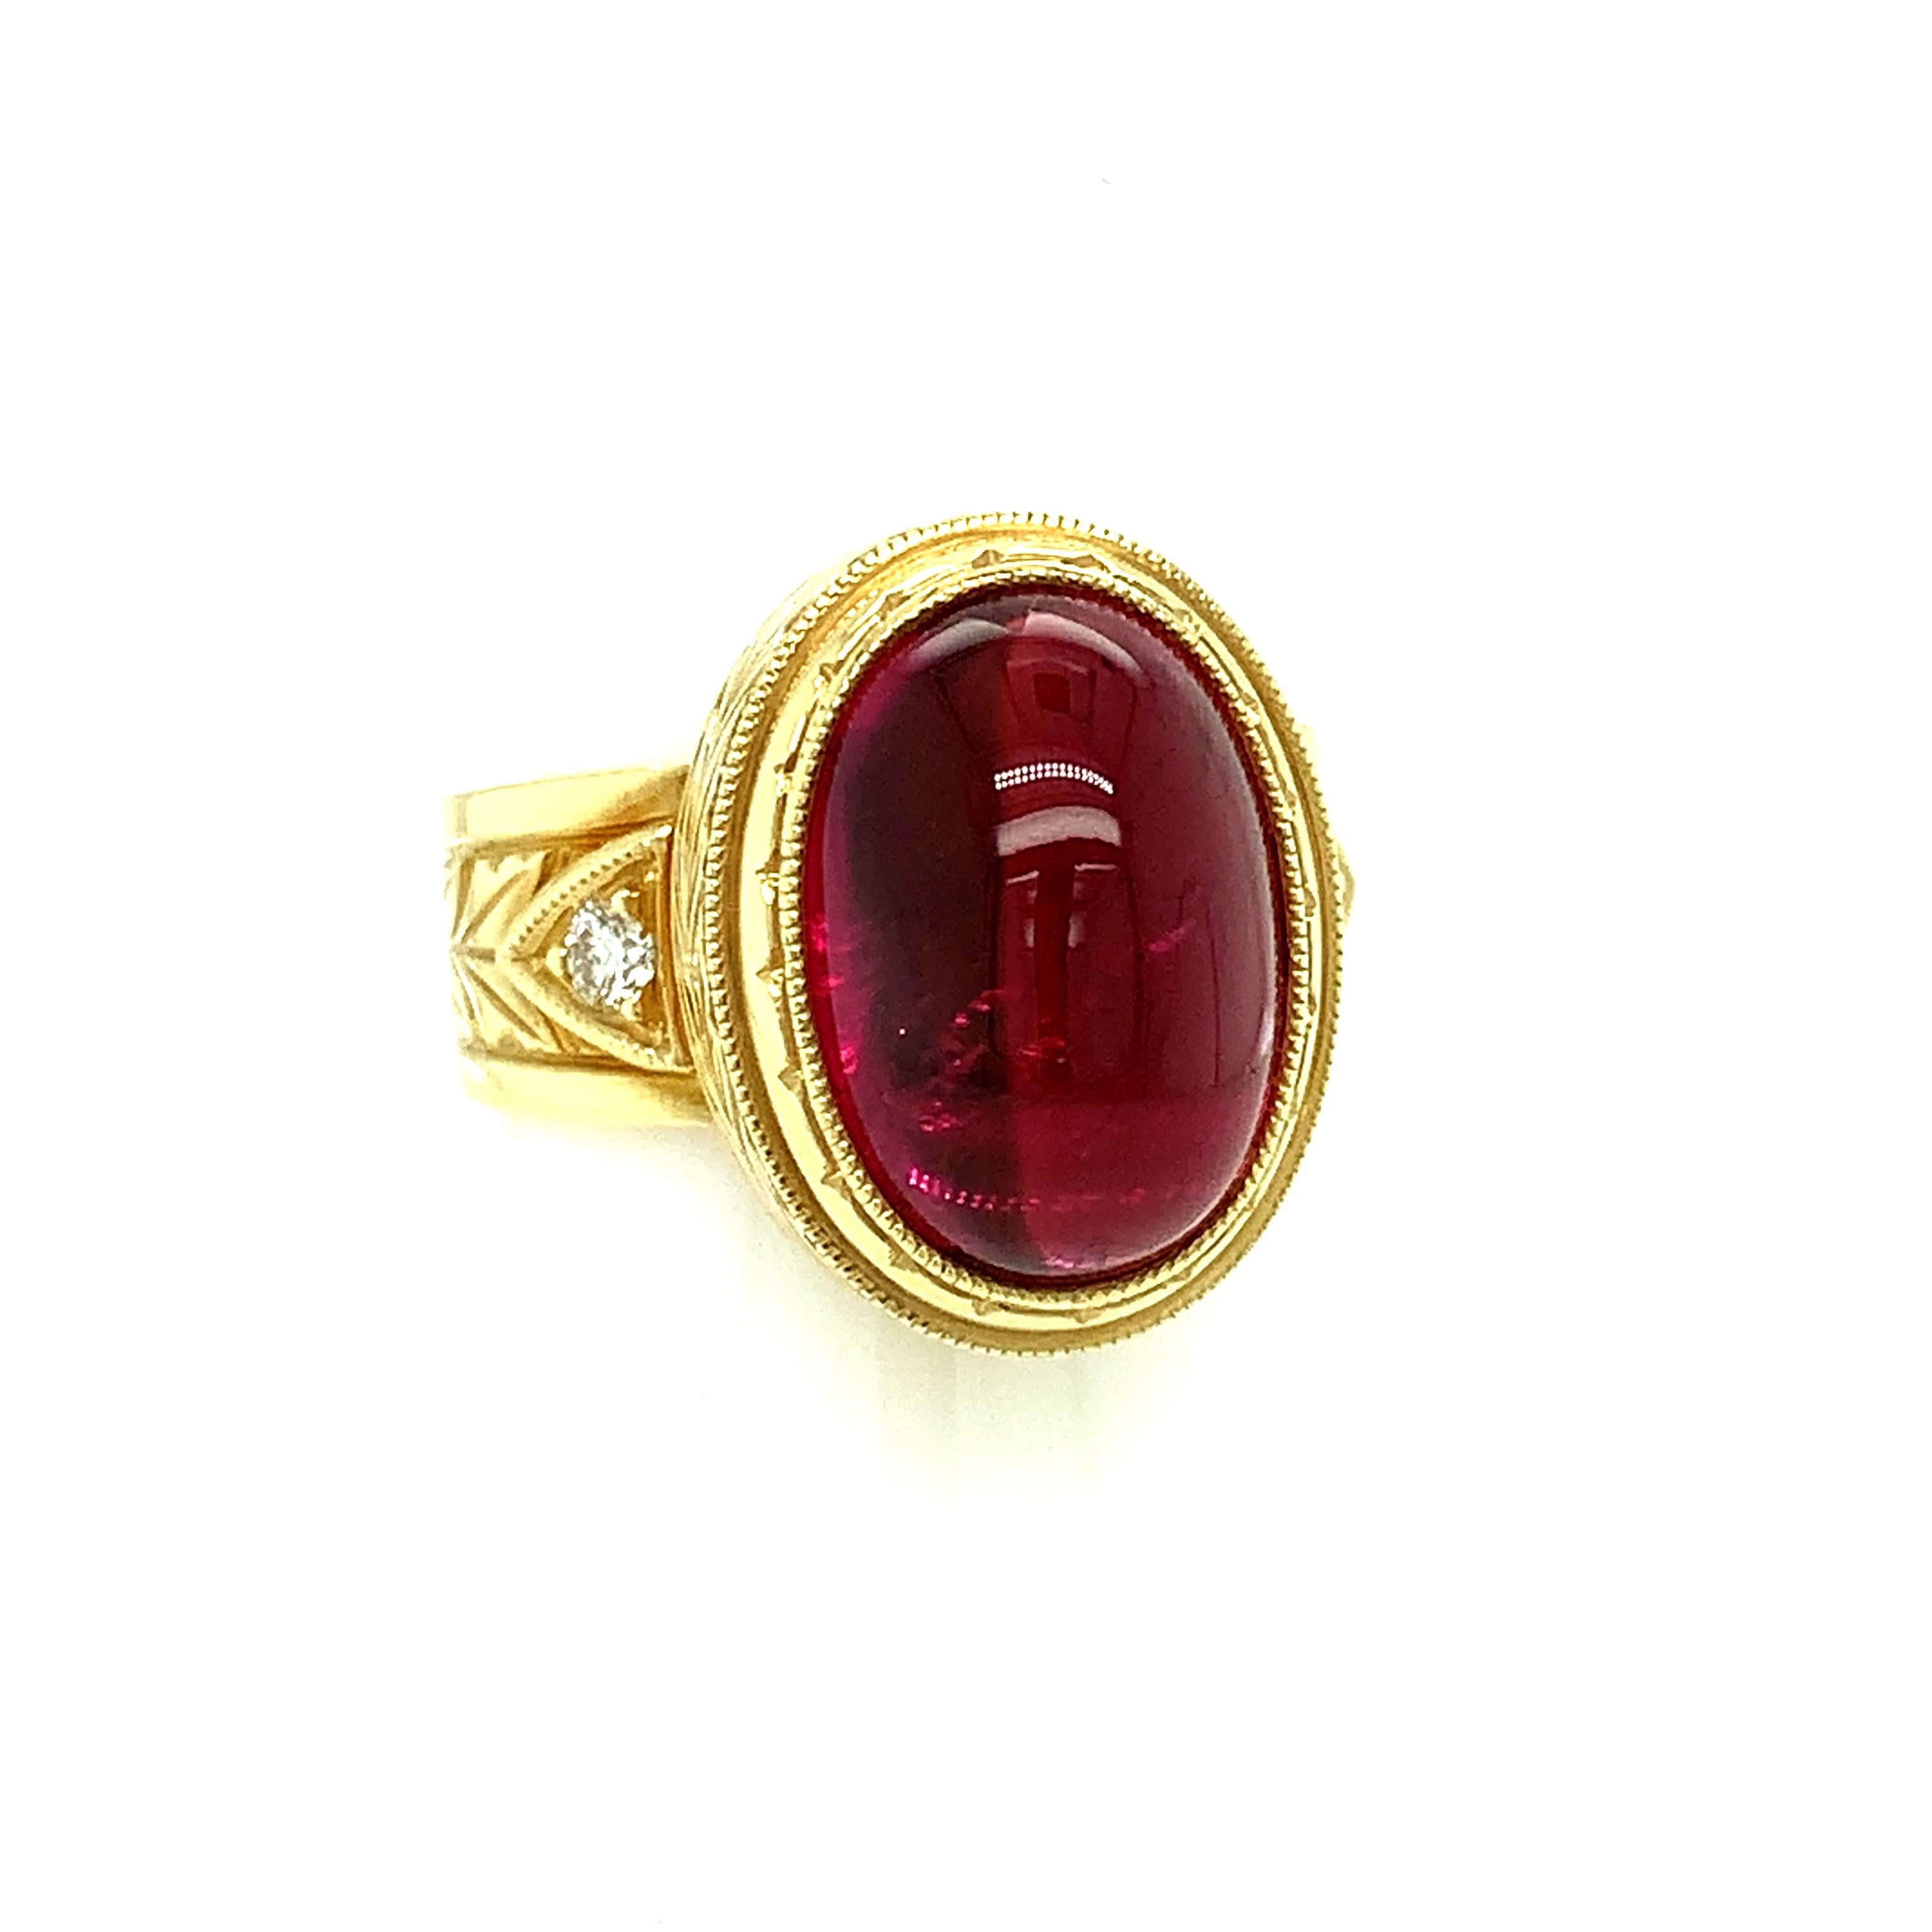 Artisan 7.47 Carat Rubellite Tourmaline Cabochon and Diamond Band Ring in Yellow Gold For Sale